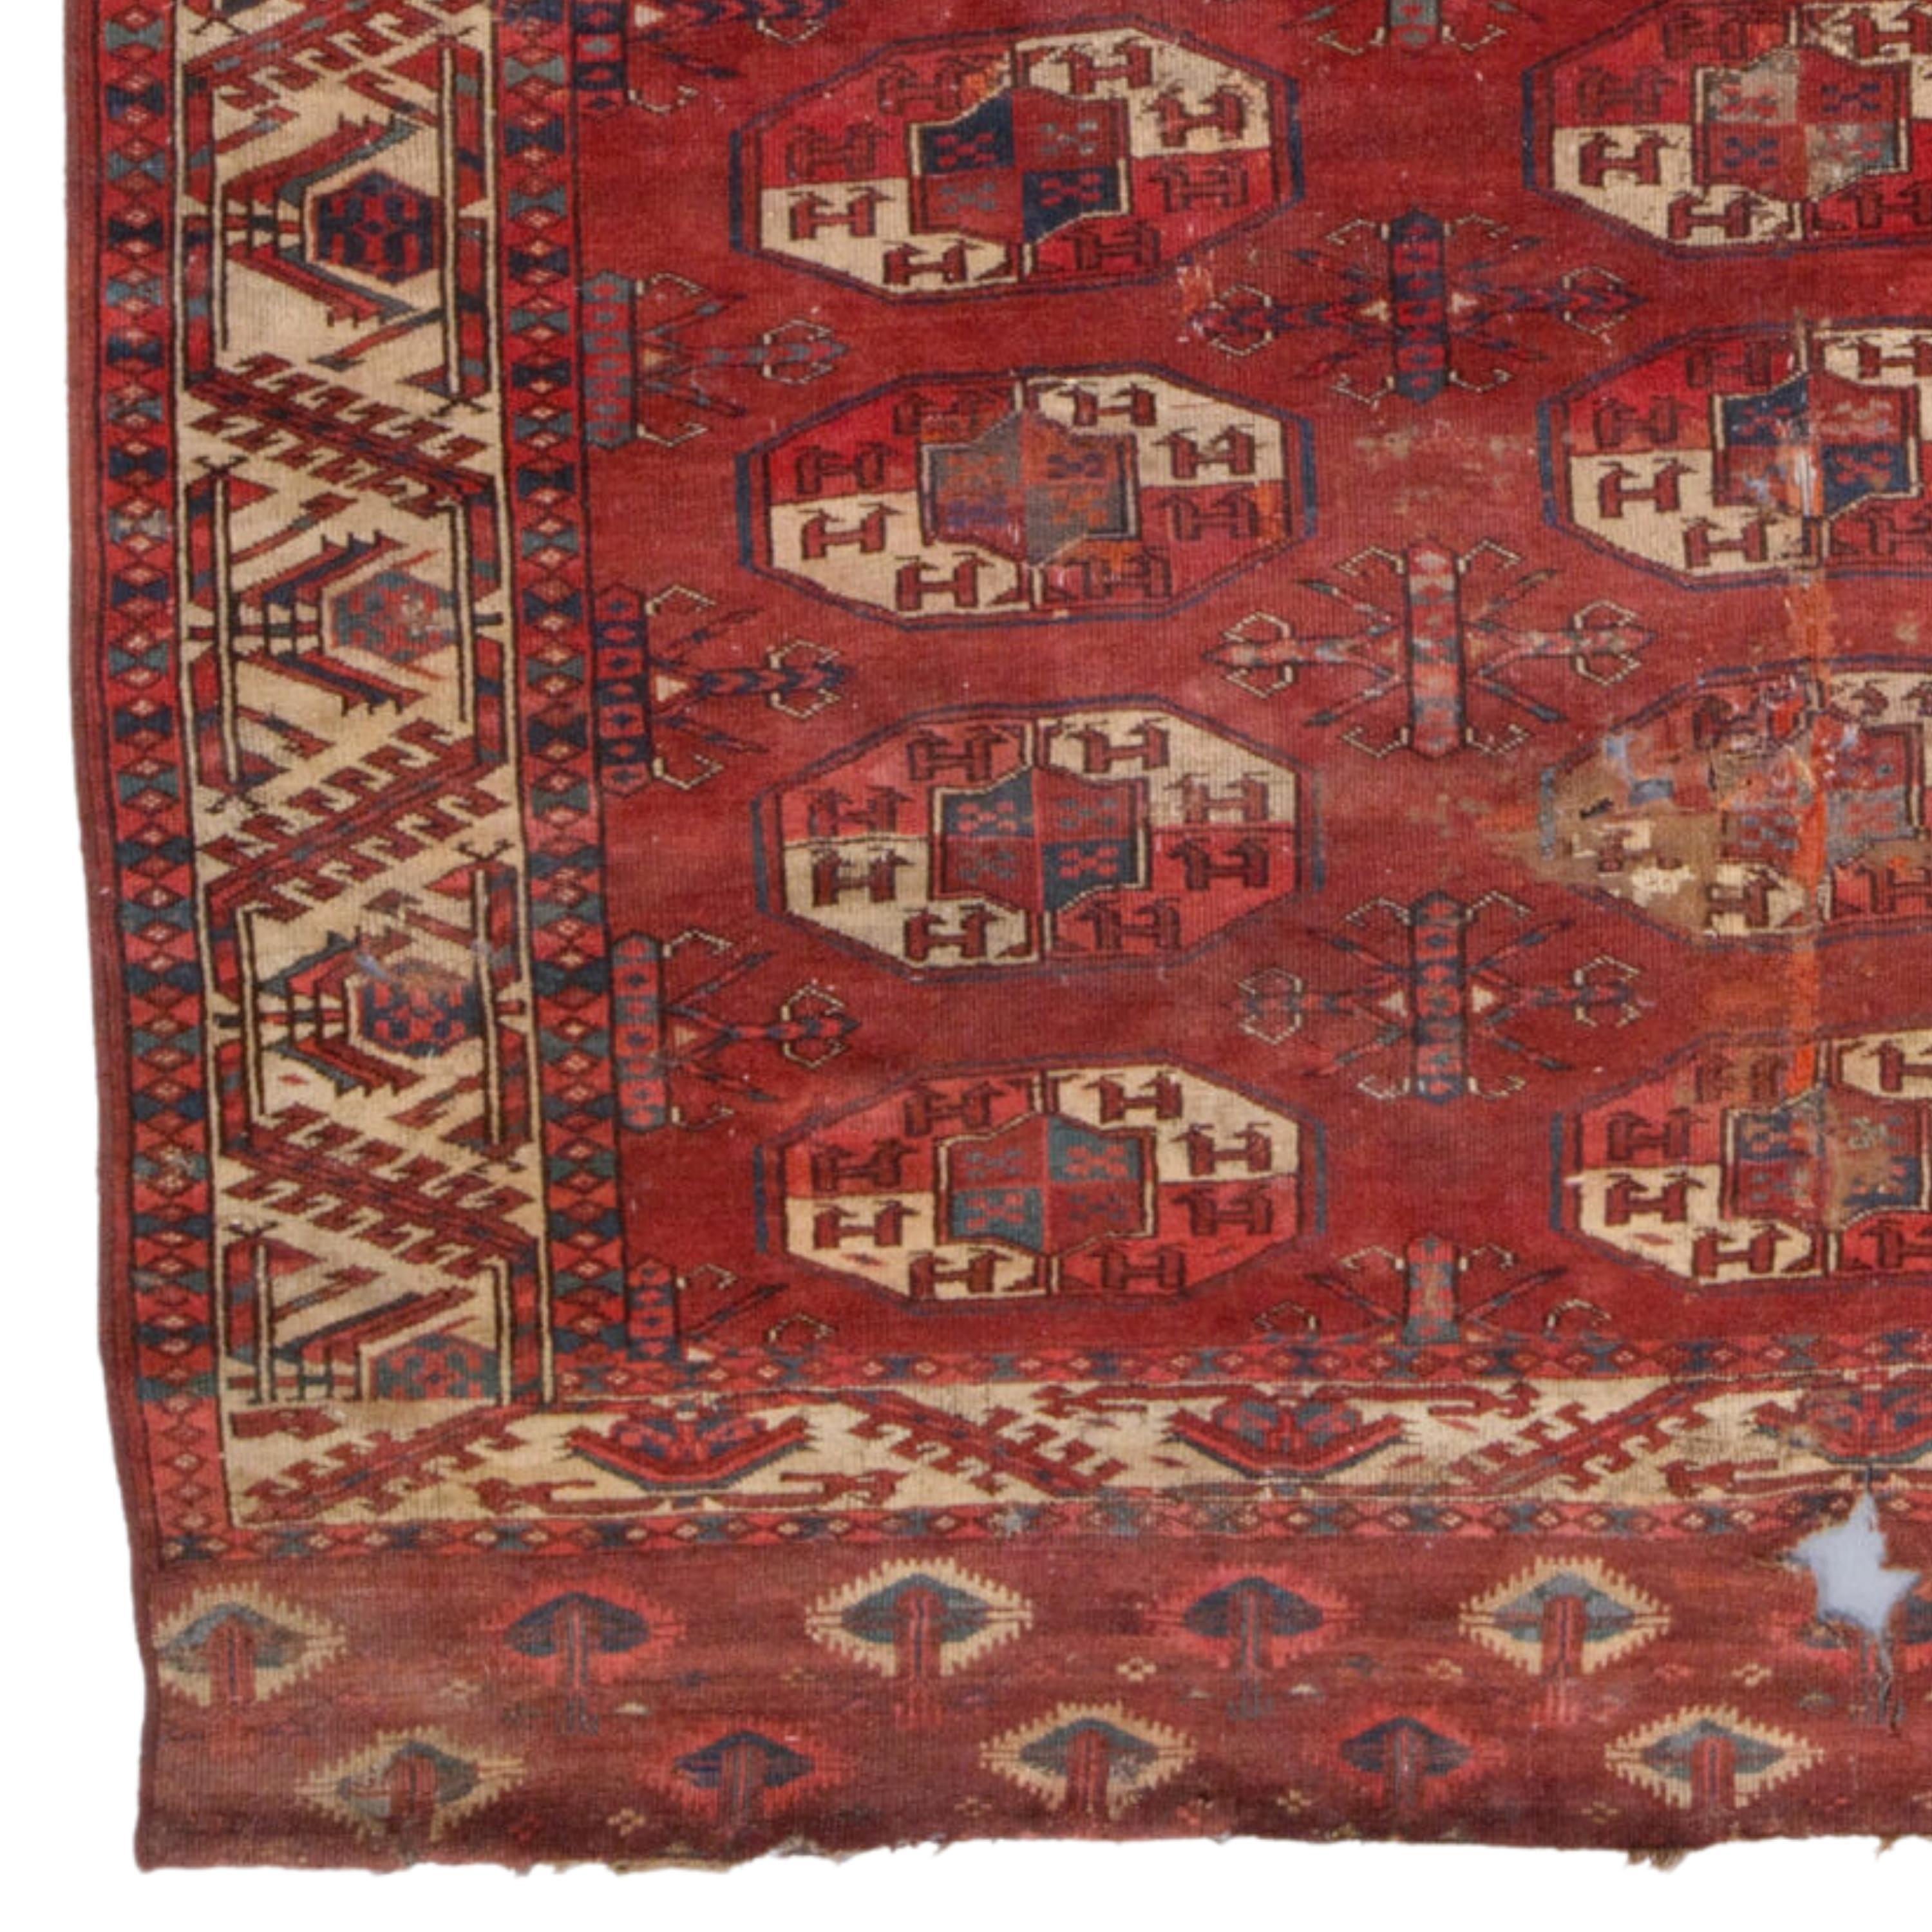 Antique Yomud Main Carpet - Early Turkmen Yomud Main Rug
Circa 1800   Size 167 x 246 cm (5,47 - 8,07 ft)

This unique Yomud main carpet from the 1800s adds nobility to any space with its rich history and elegant craftsmanship. Its vibrant red colors